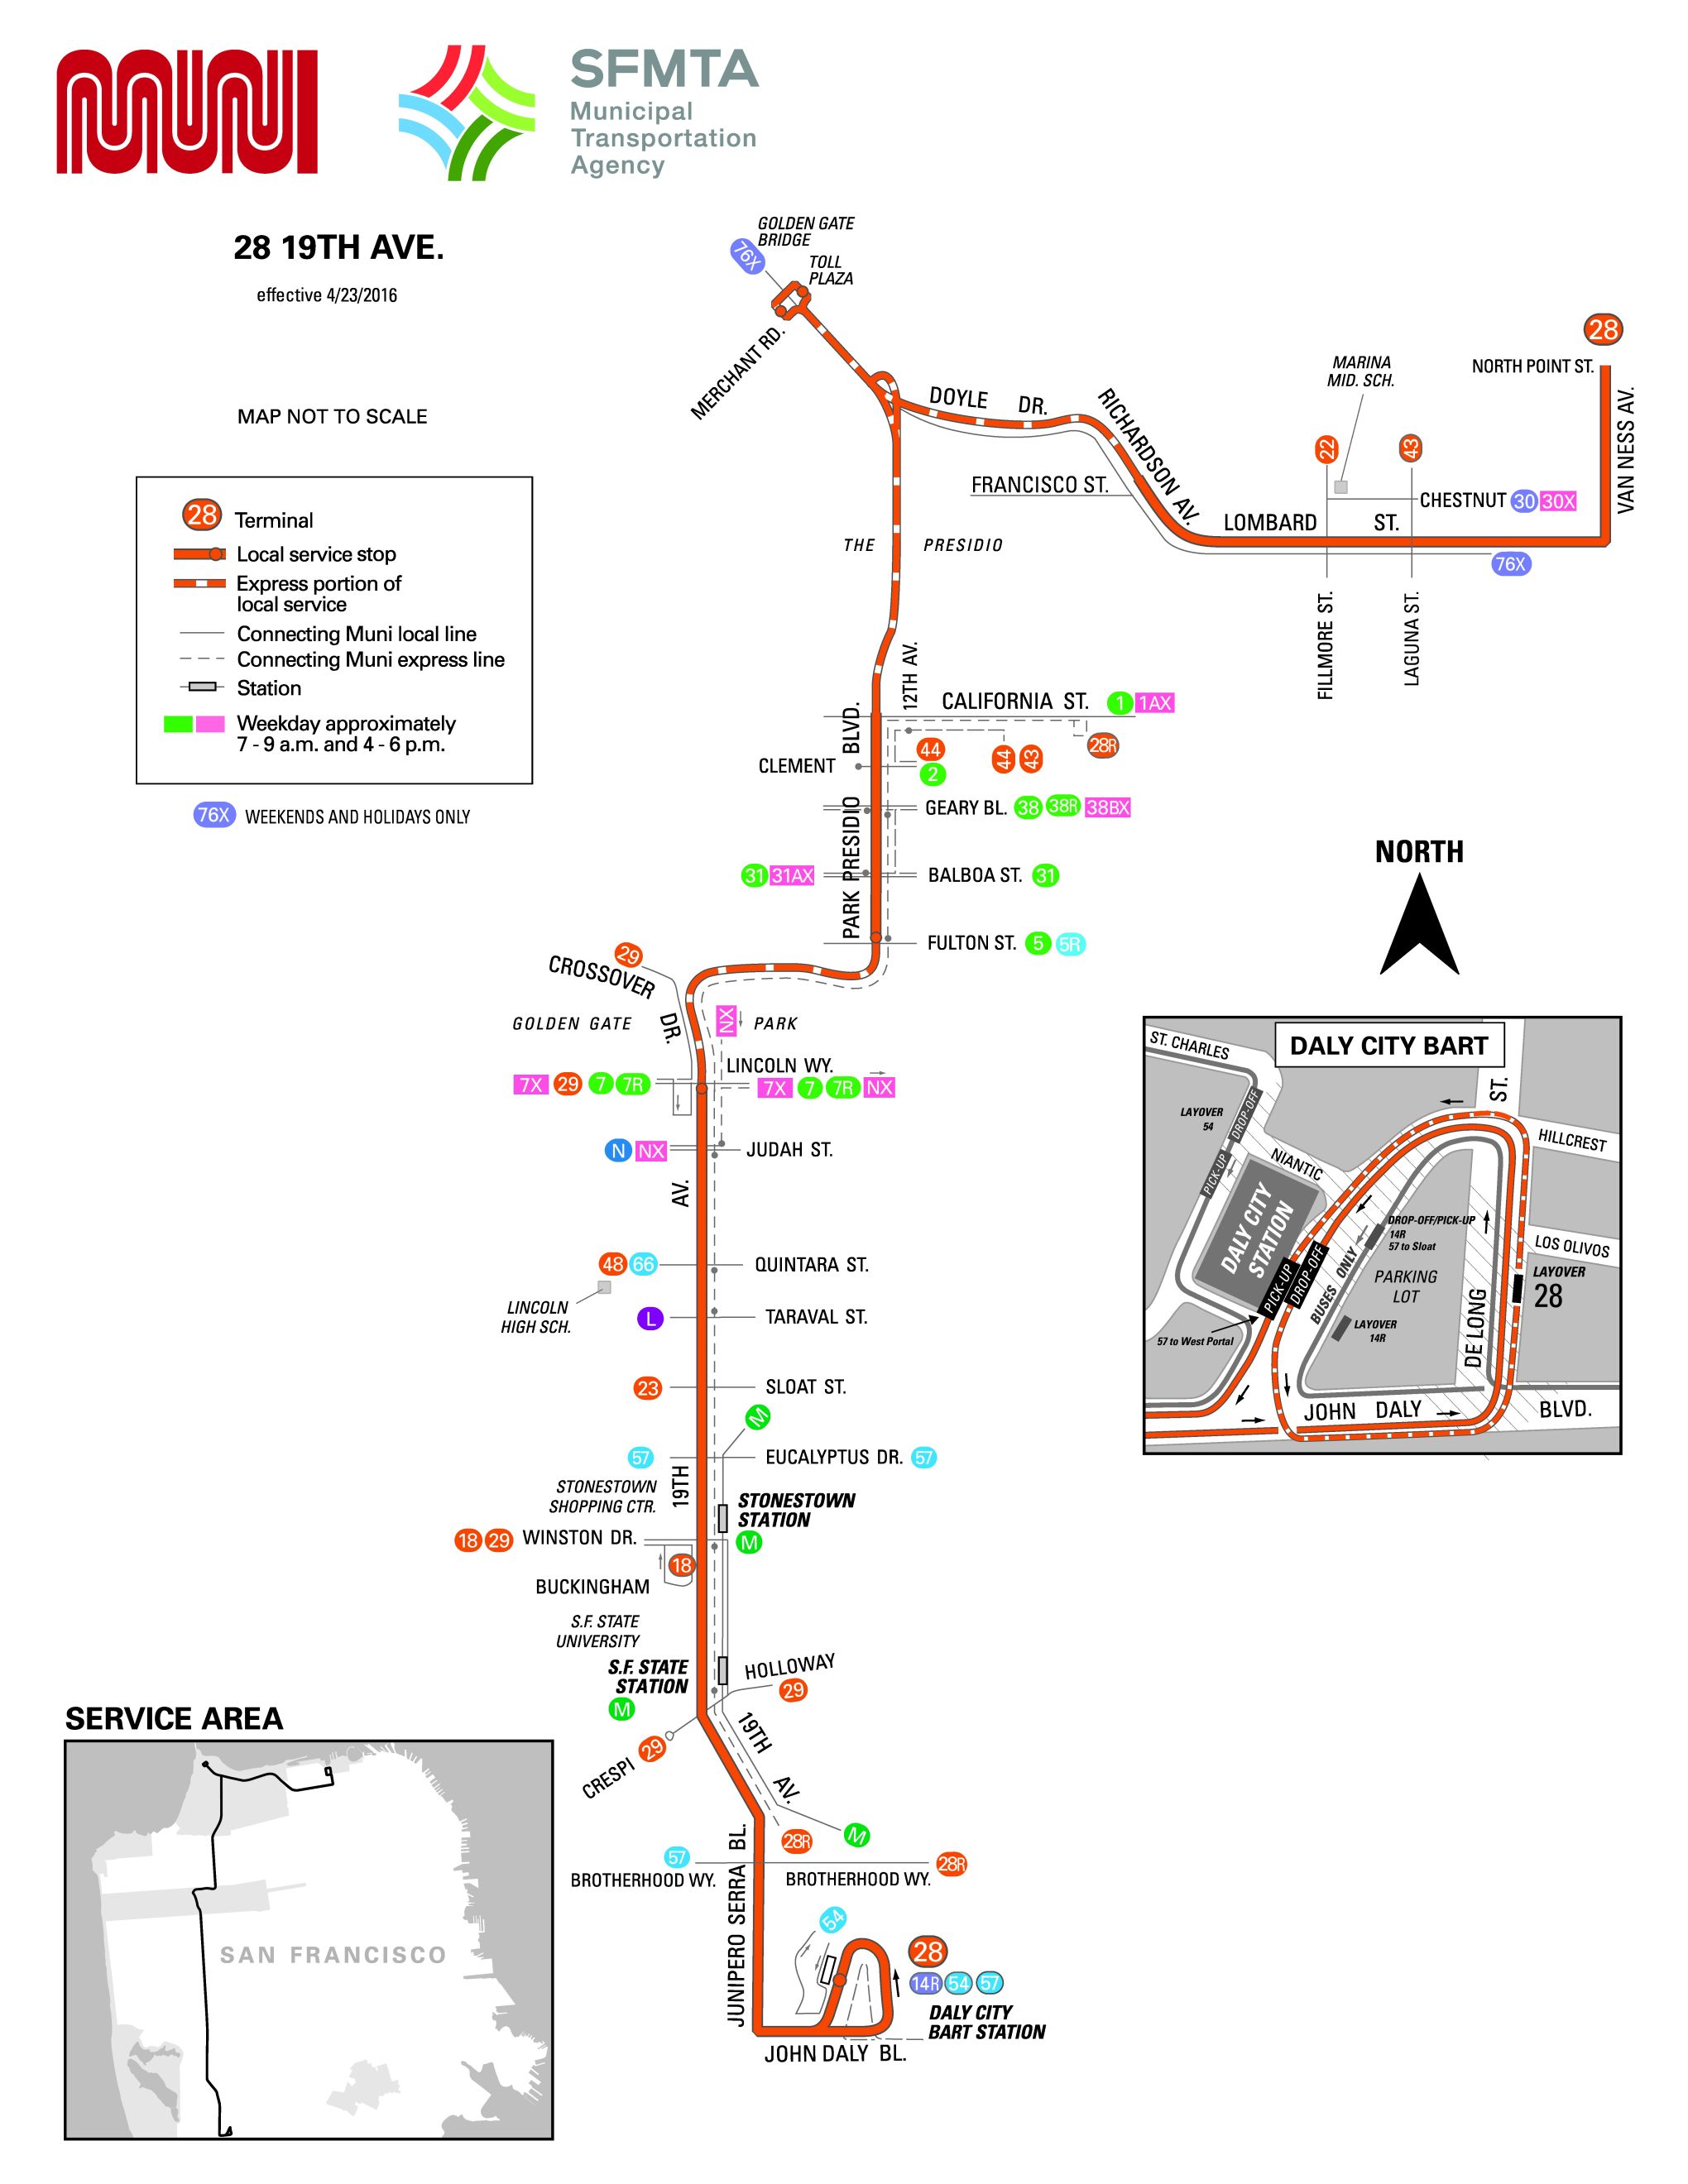 380 Route: Schedules, Stops & Maps - Eastbound Antioch BART (Updated)